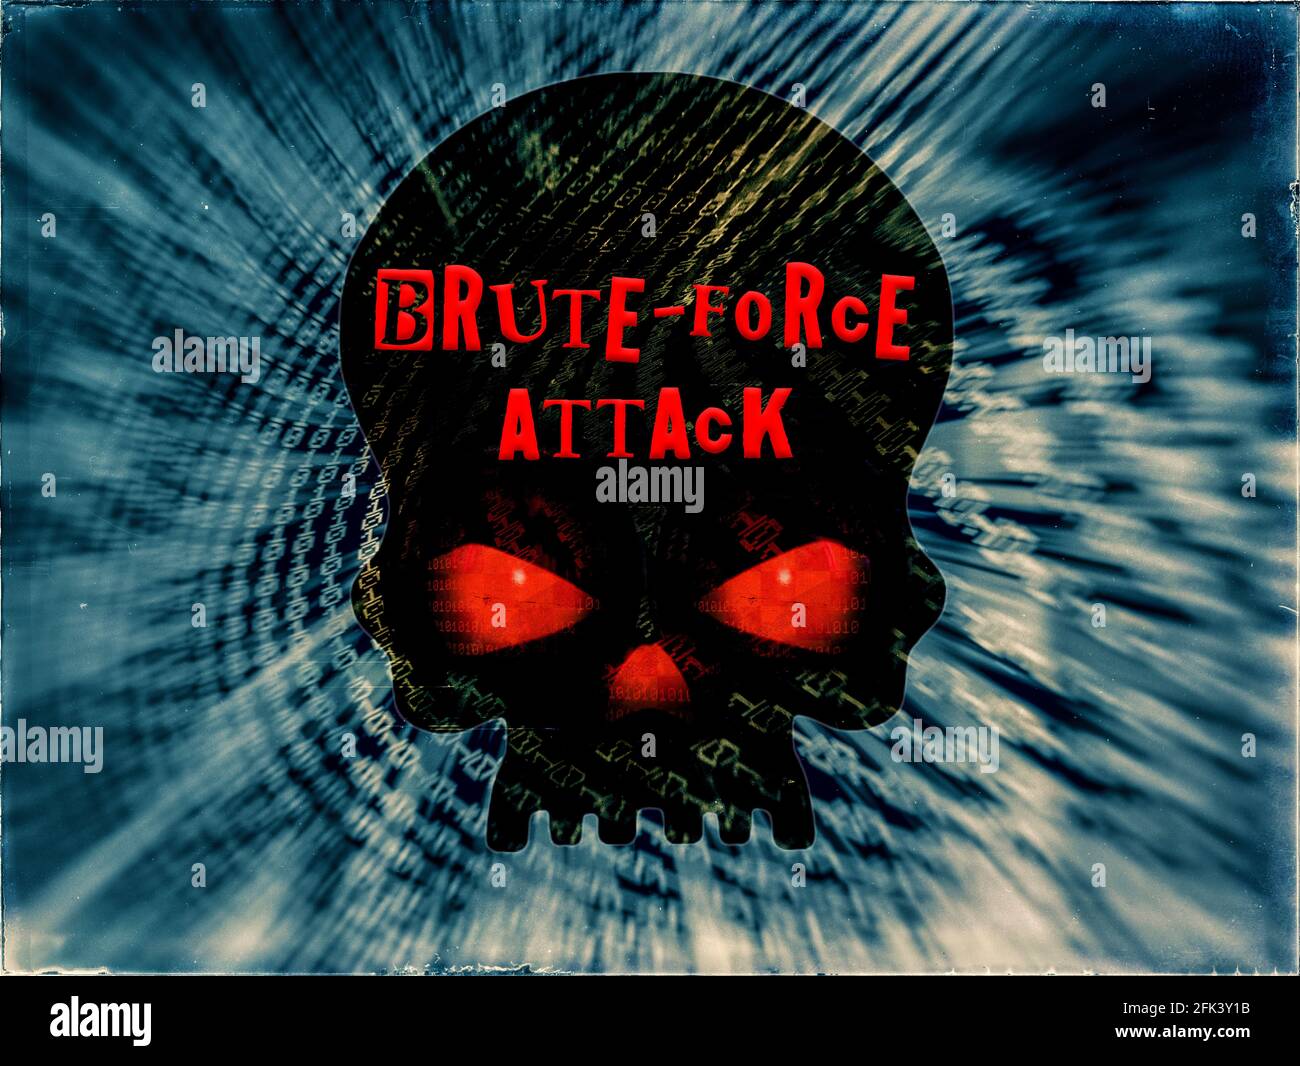 Brute-force attack displayed on a Pirate skull on Binary code background Stock Photo